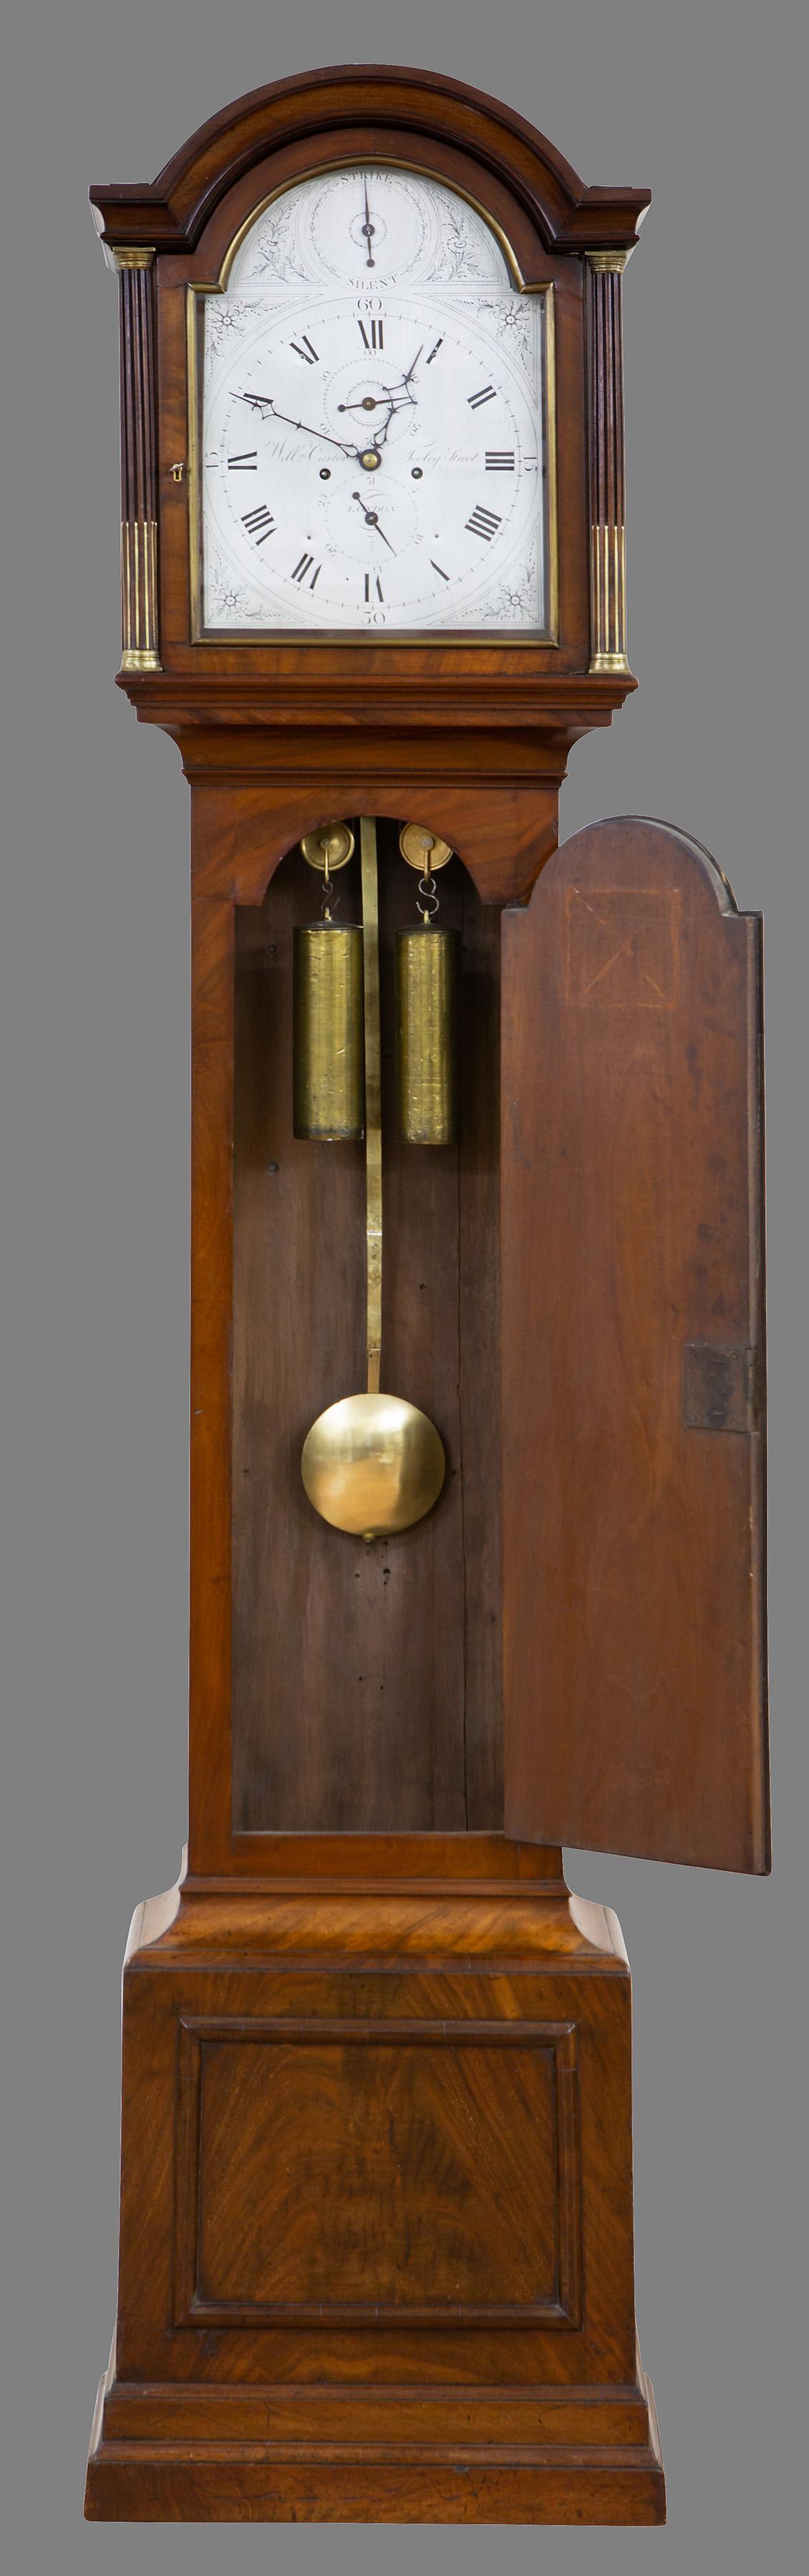 Georgian Longcase Clock

A finely figured flame mahogany case with stepped base, raised moulding to the plinth, long break arch top trunk door with brass escutcheon, reeded canted corners inset with brass corinthian capitals. Break arch hood with